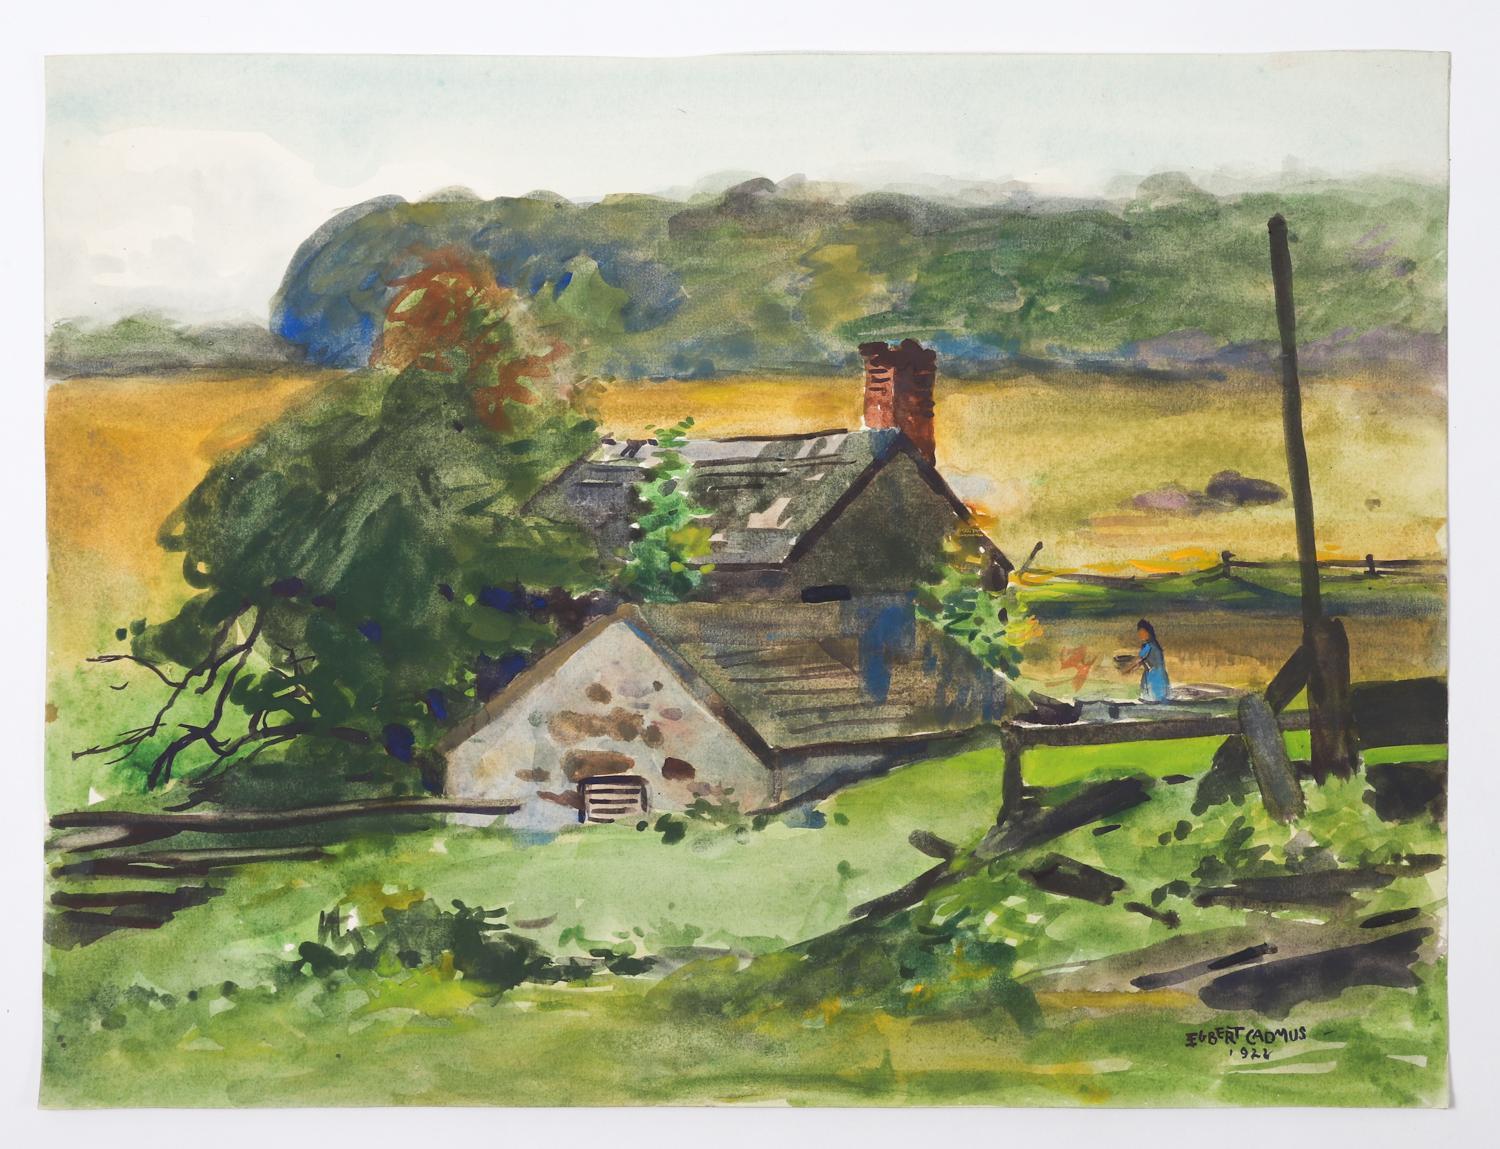 Watercolor on paper painting by Egbert Cadmus (American, 1868-1939) of New England farmhouse landscape. Signed and dated 1922 lower right corner. An accomplished watercolorist, best known as the father of artist Paul Cadmus. Became a member of the